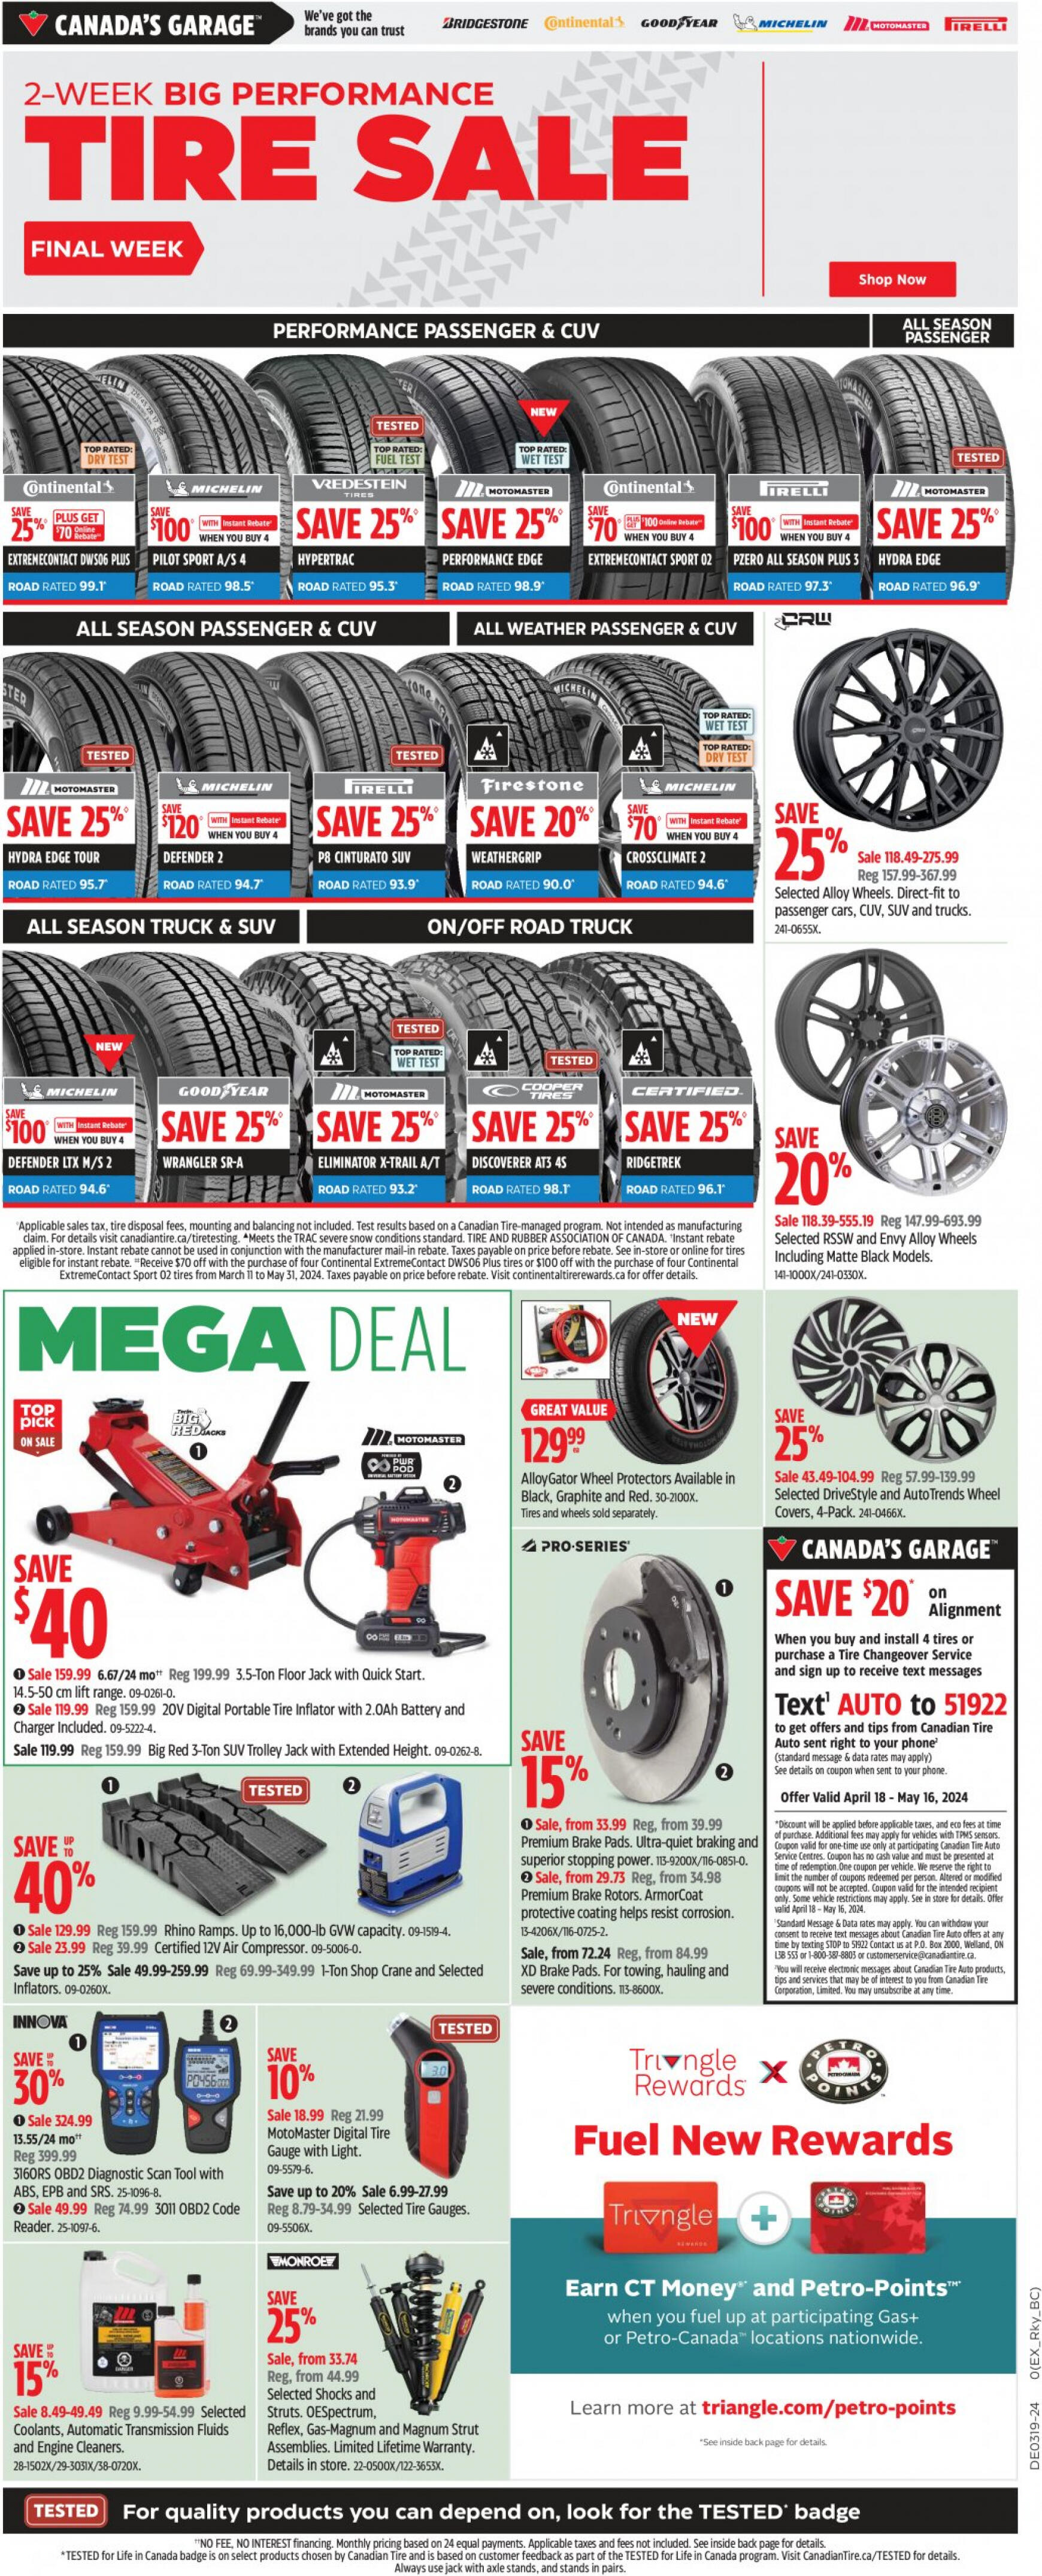 canadian-tire - Canadian Tire flyer current 02.05. - 08.05. - page: 20